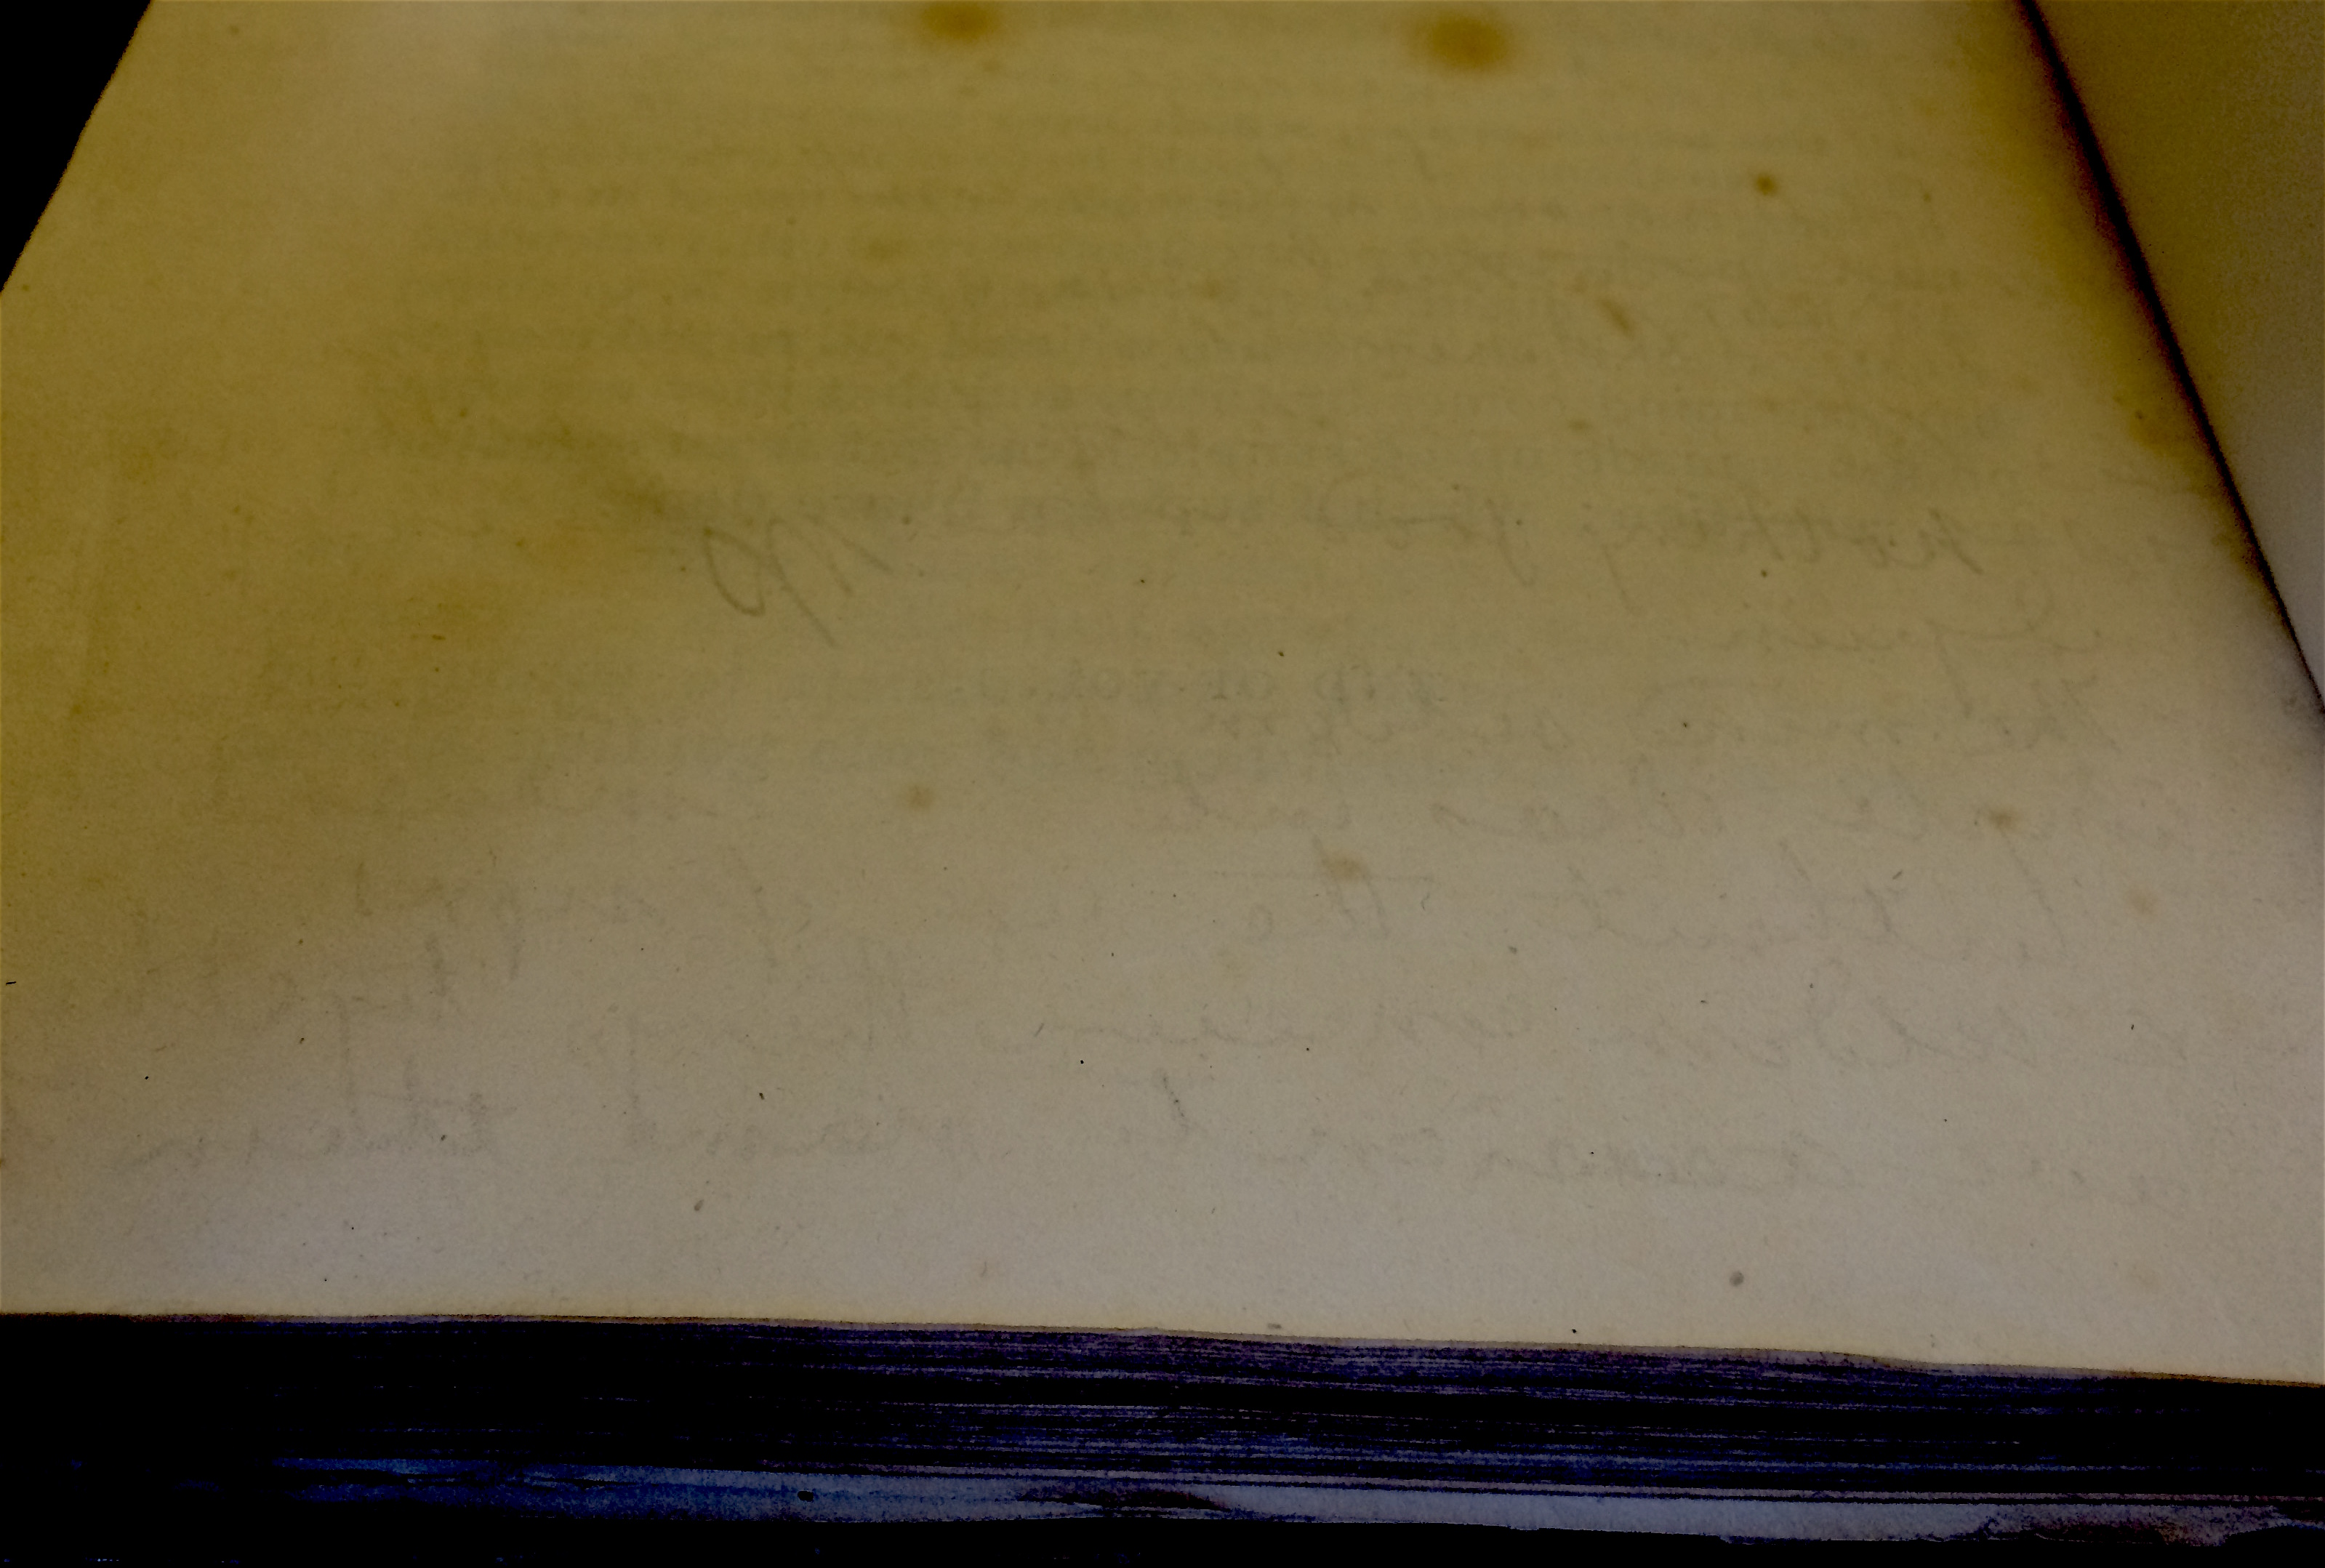 Imprint of handwriting on page.